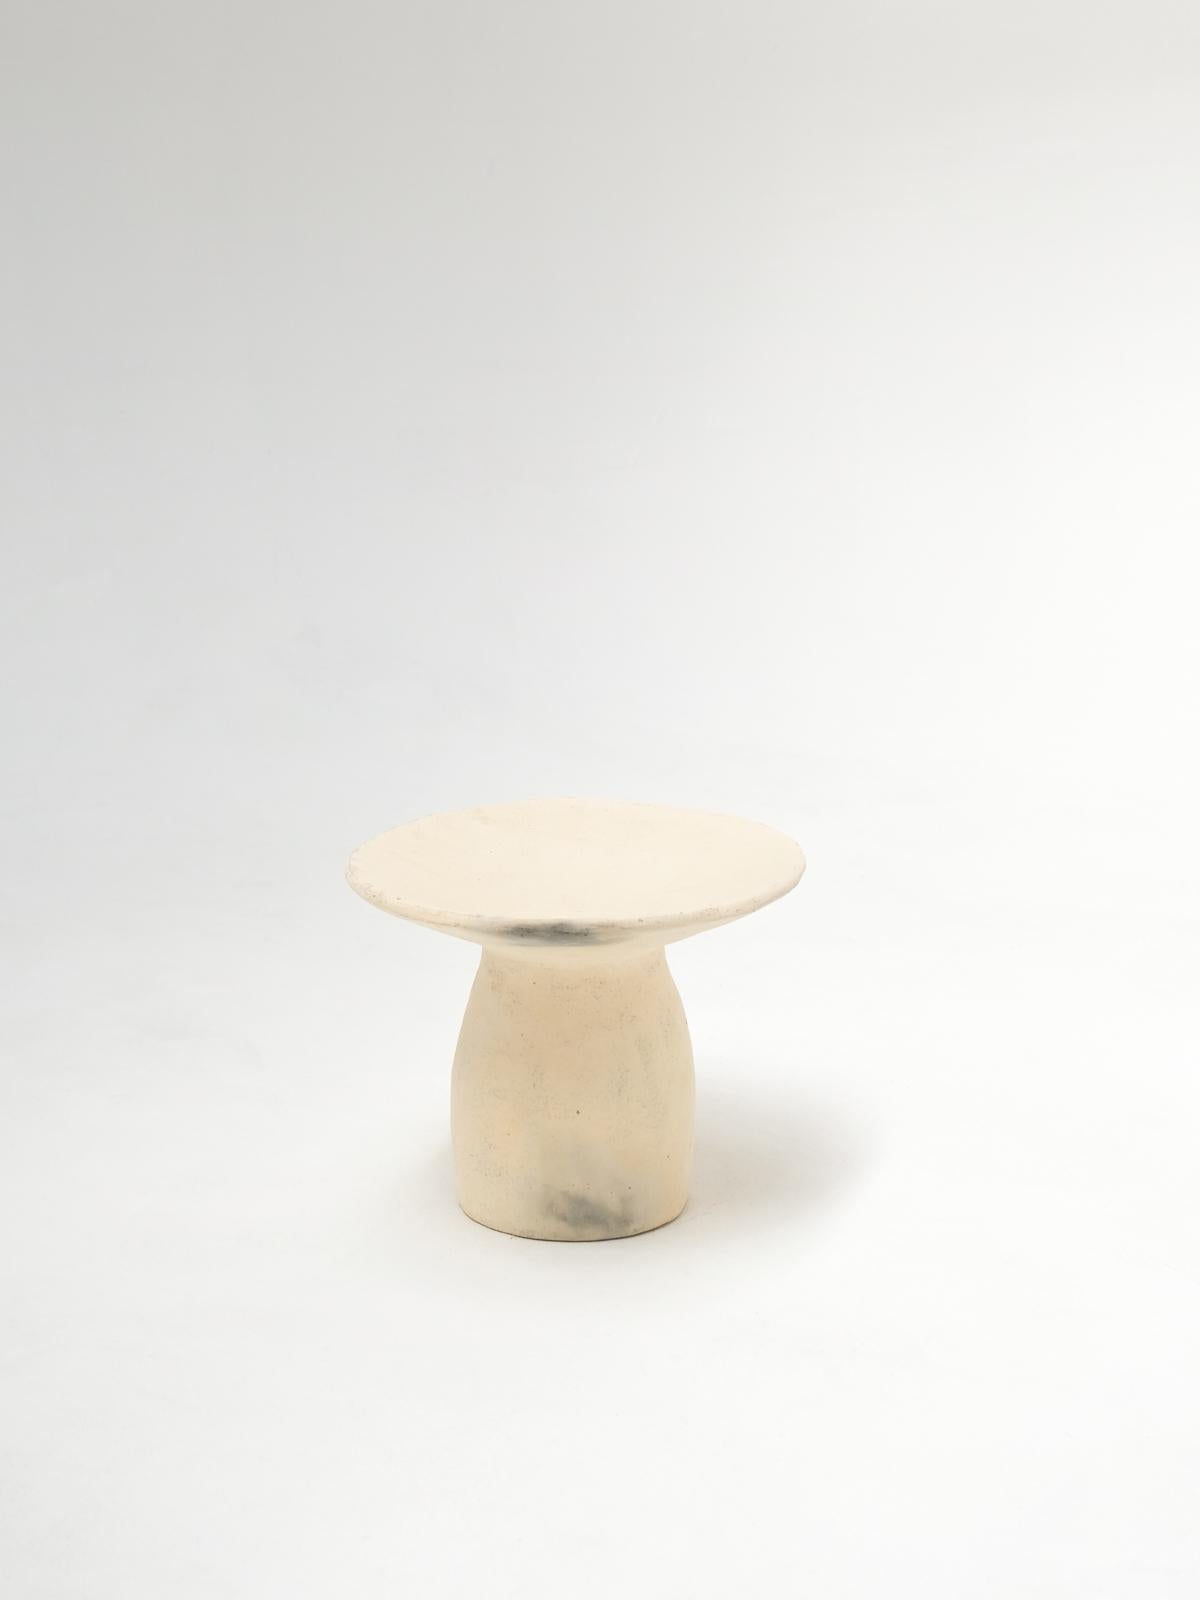 White Side Tables Made of local Clay, natural pigments, Handcrafted 2